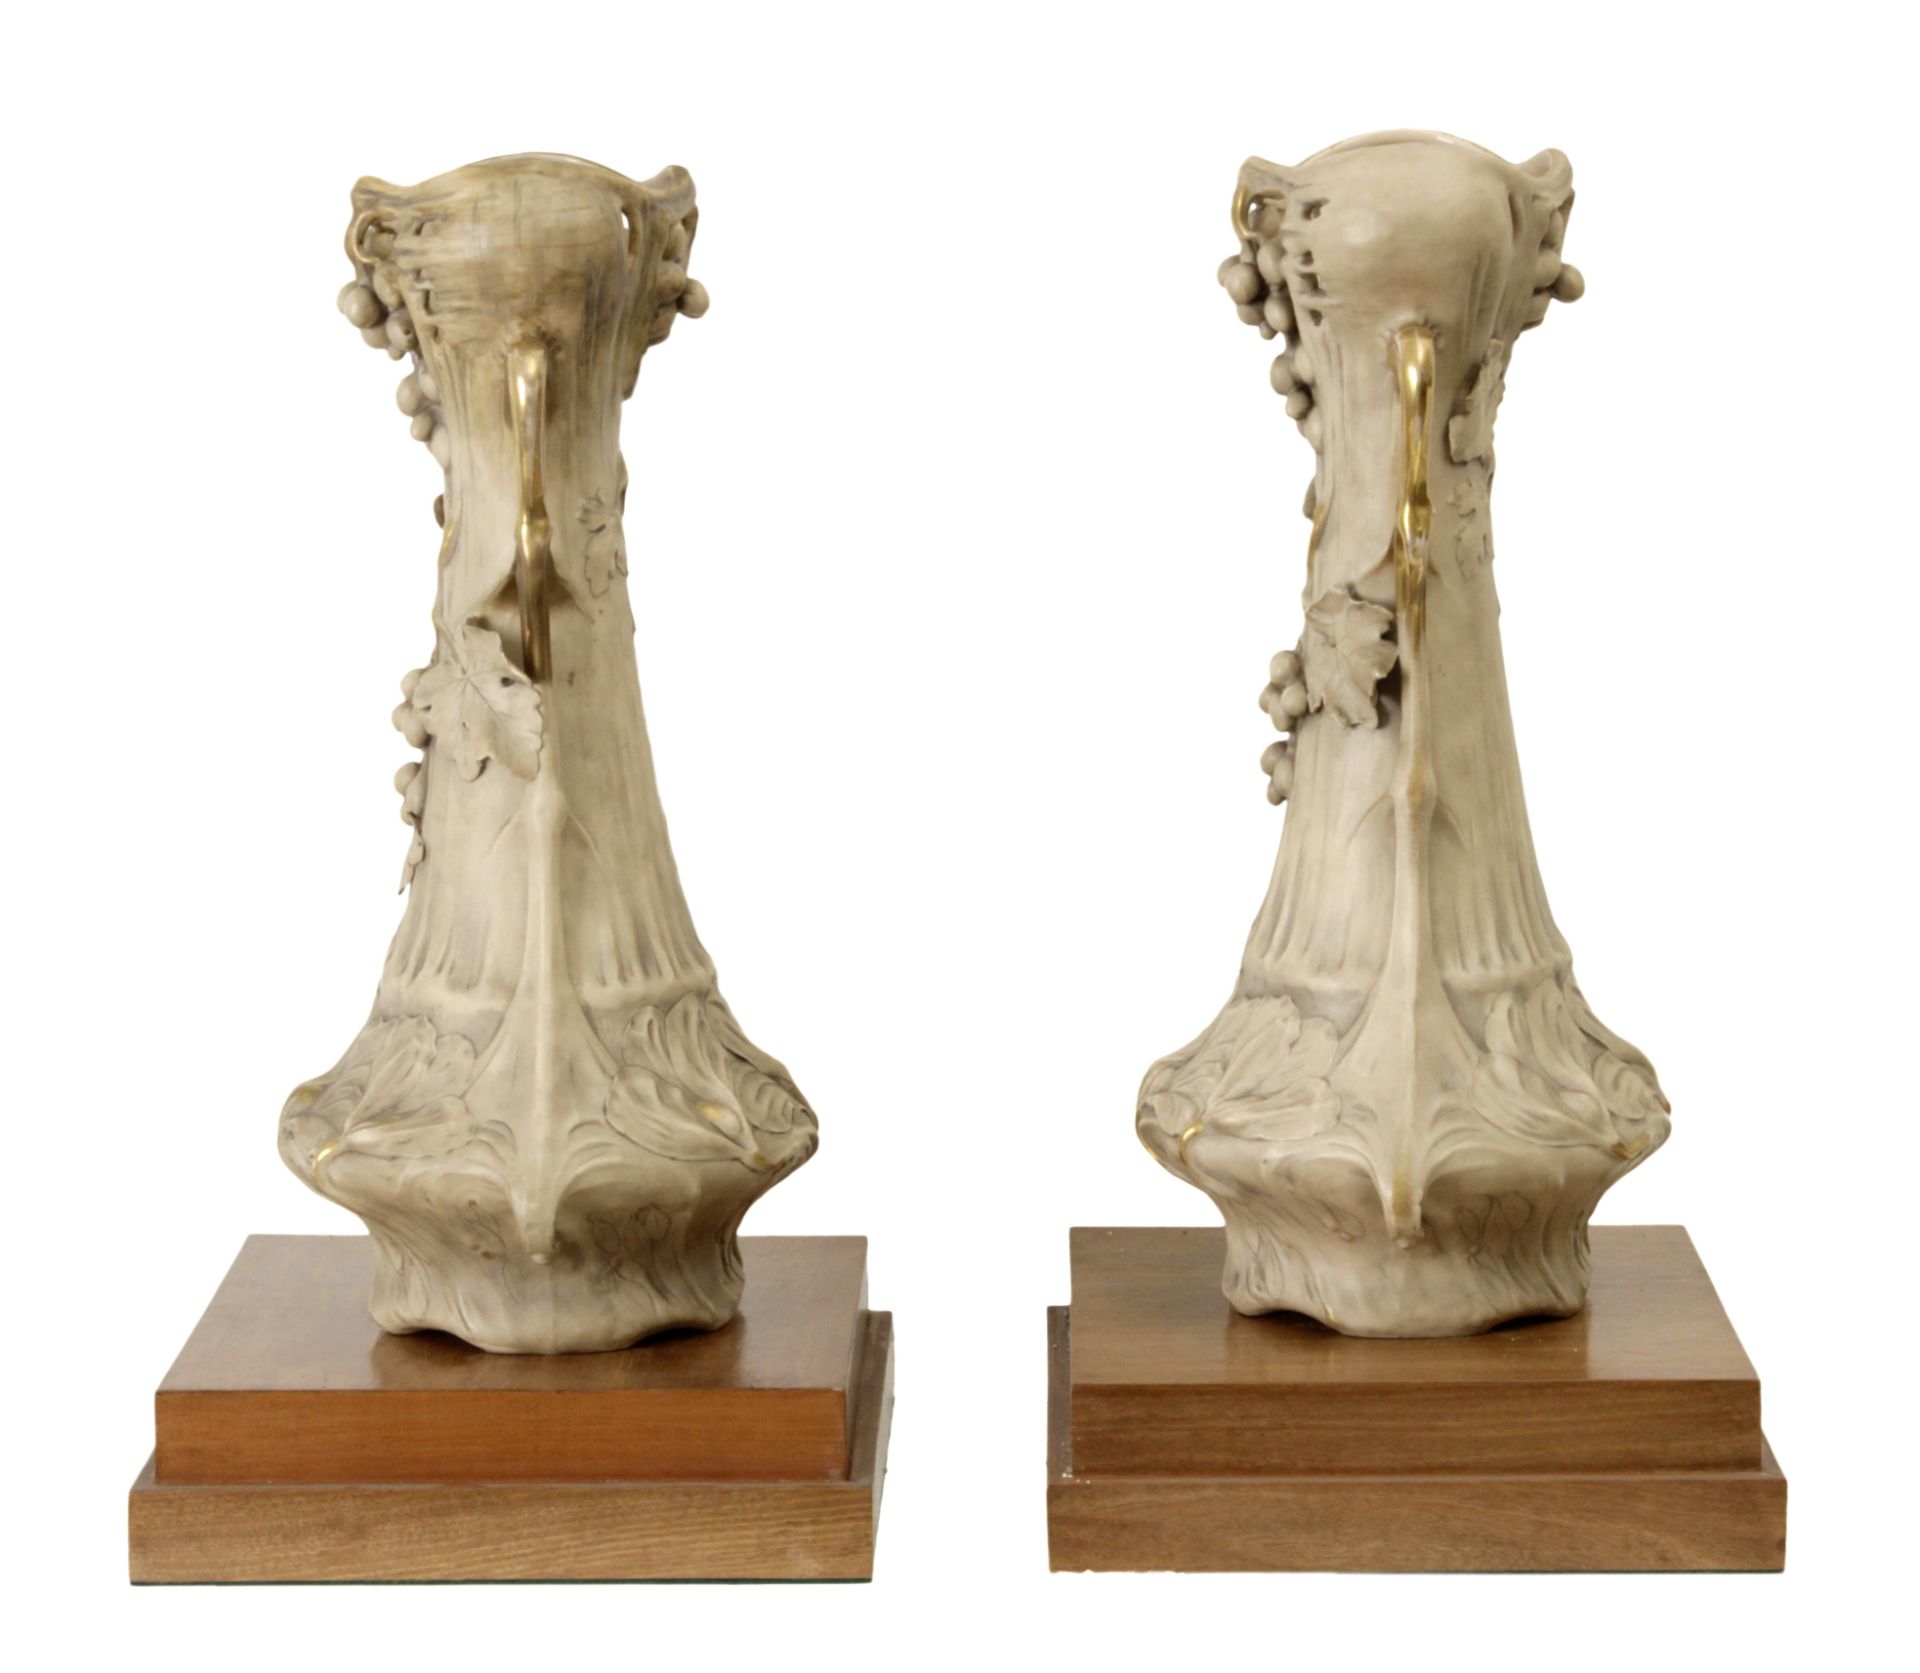 Pair of late 19th century-early 20th century Austrian vases in Royal Dux porcelain - Image 2 of 6